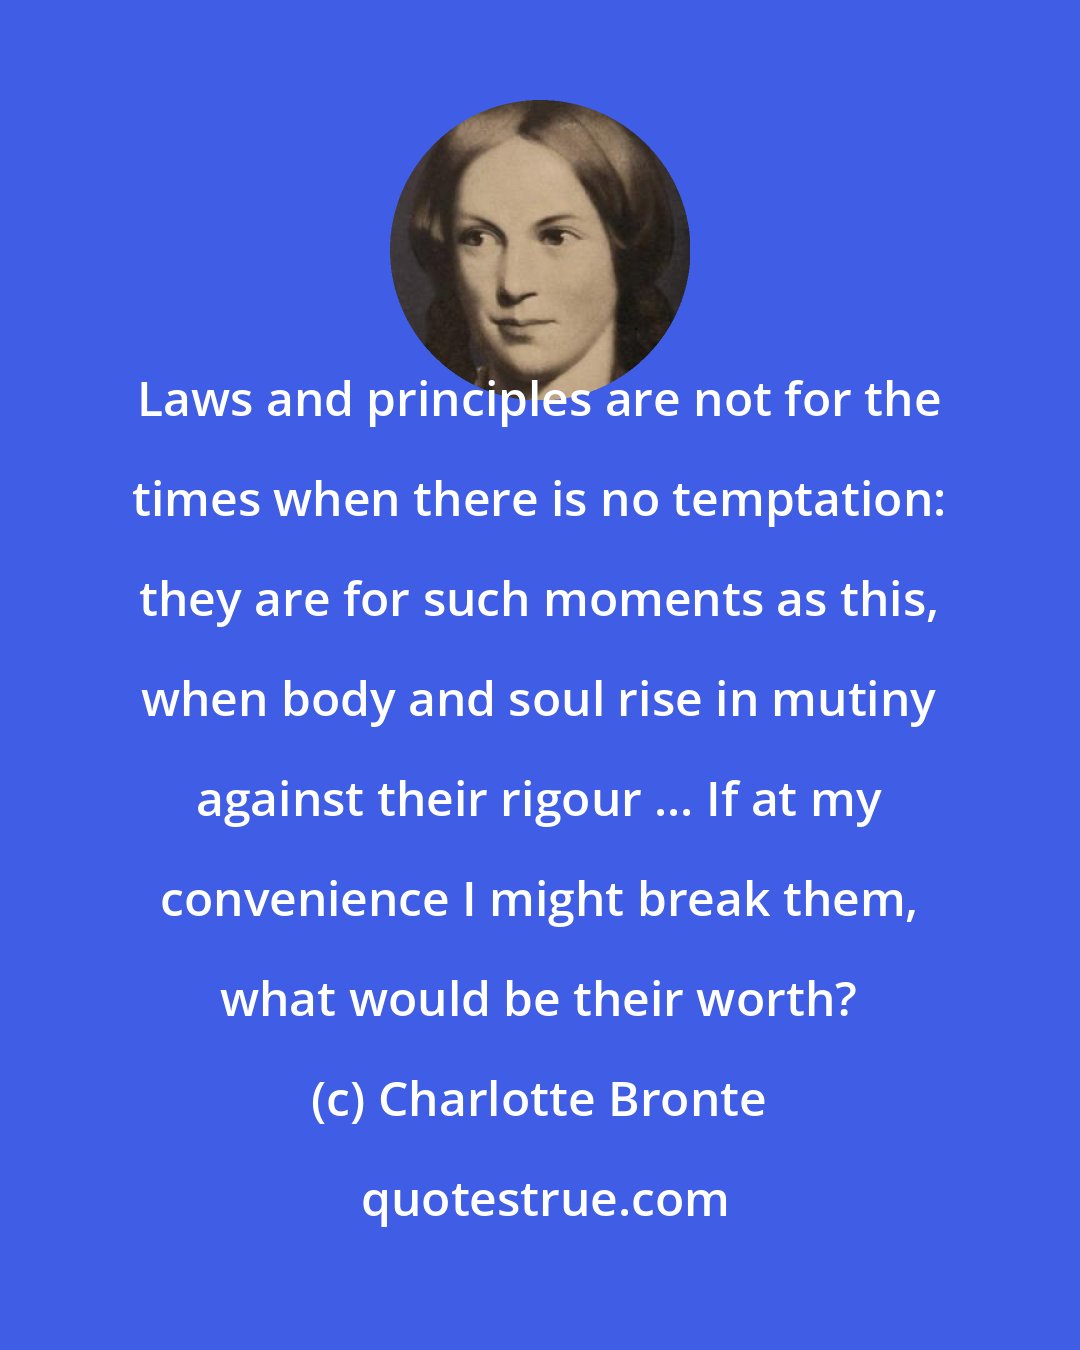 Charlotte Bronte: Laws and principles are not for the times when there is no temptation: they are for such moments as this, when body and soul rise in mutiny against their rigour ... If at my convenience I might break them, what would be their worth?